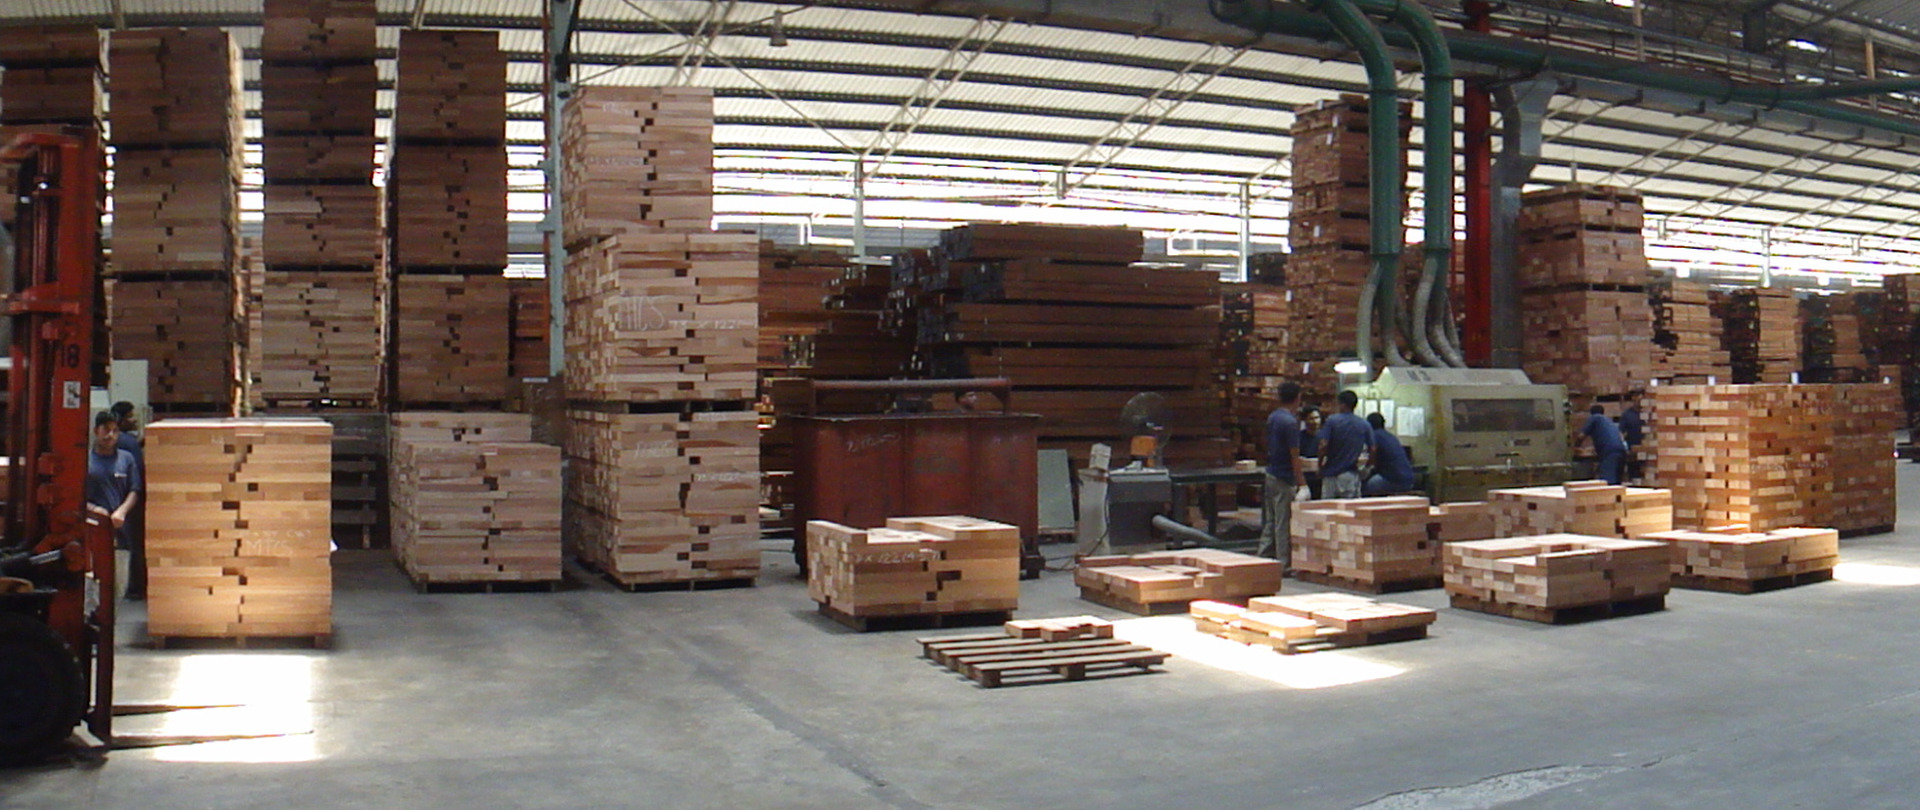 Leading Supplier of Wood Based and Engineered Products